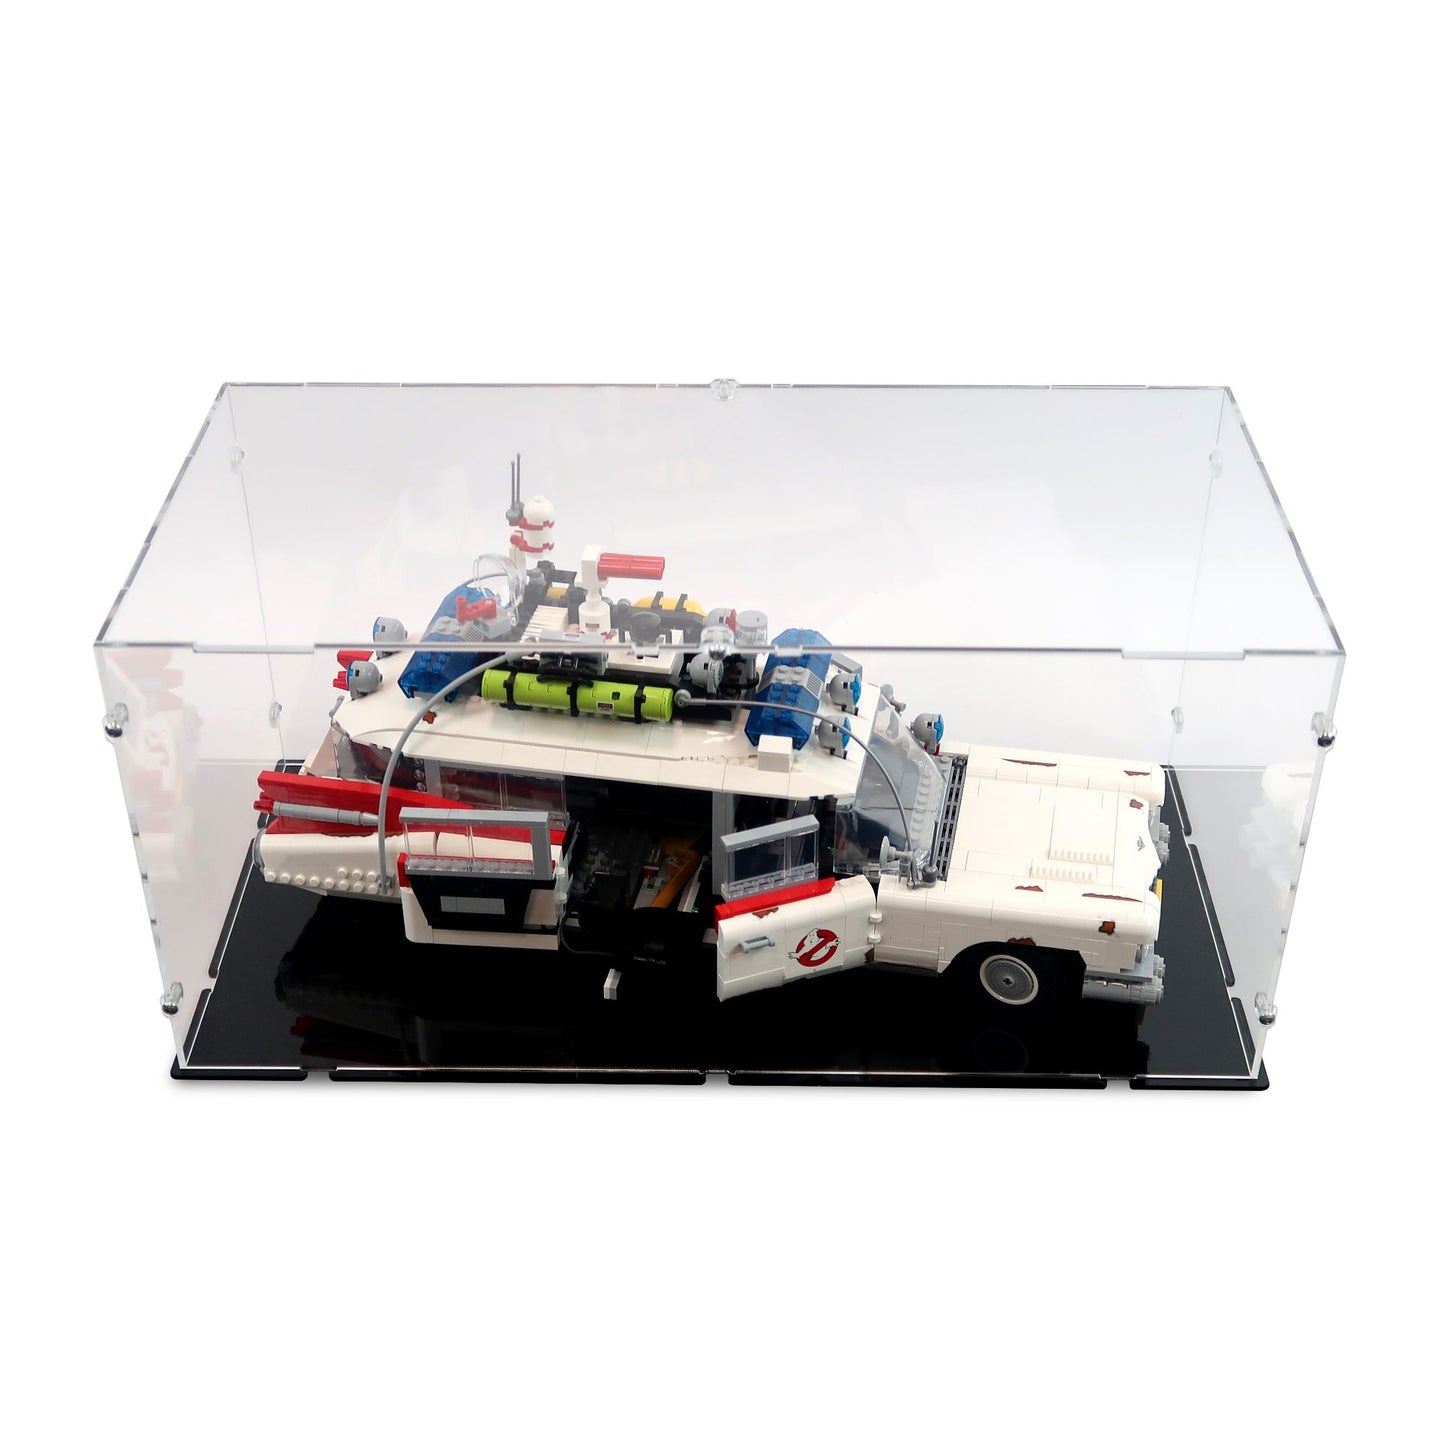 10274 Ghostbusters Ecto-1 Display Case